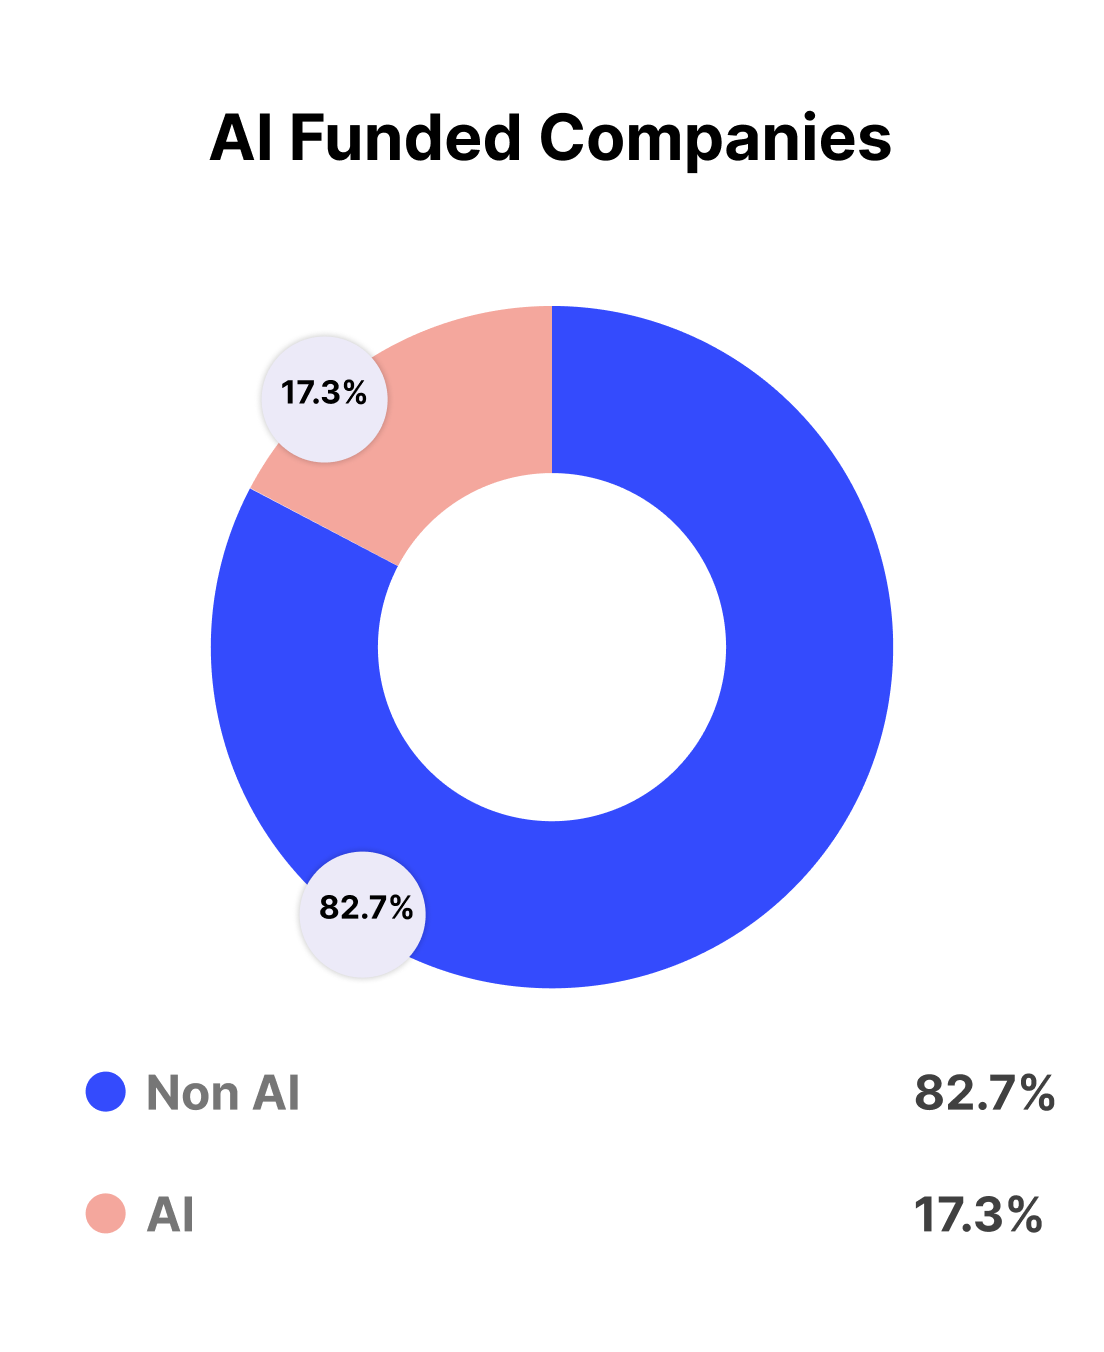 Pie chart to show the number of ai funded companies against non ai funded companies